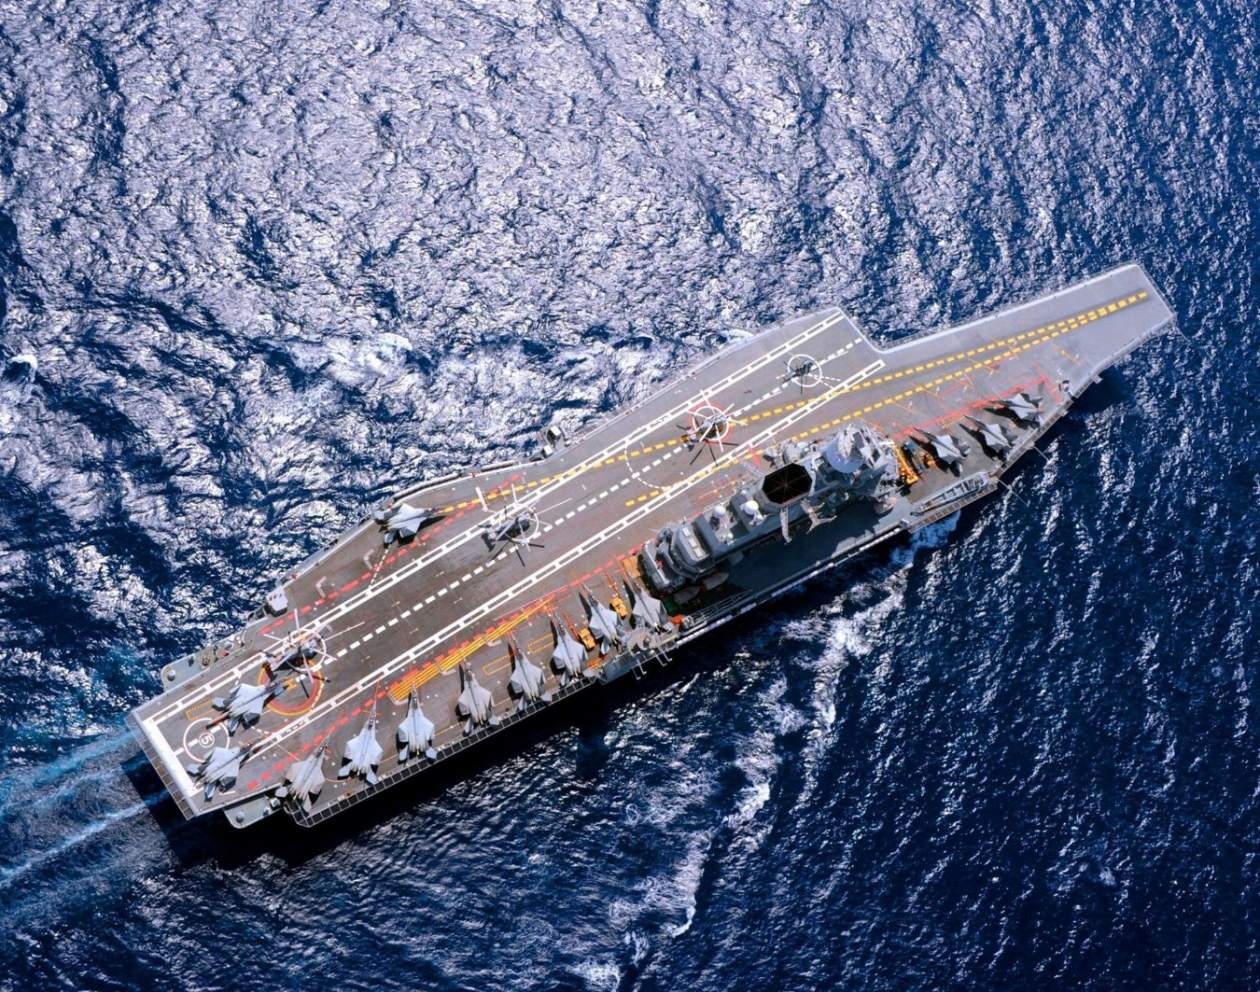 China is Expanding into the Indian Ocean—Here Are Five Things the Indian Navy Can Do About It